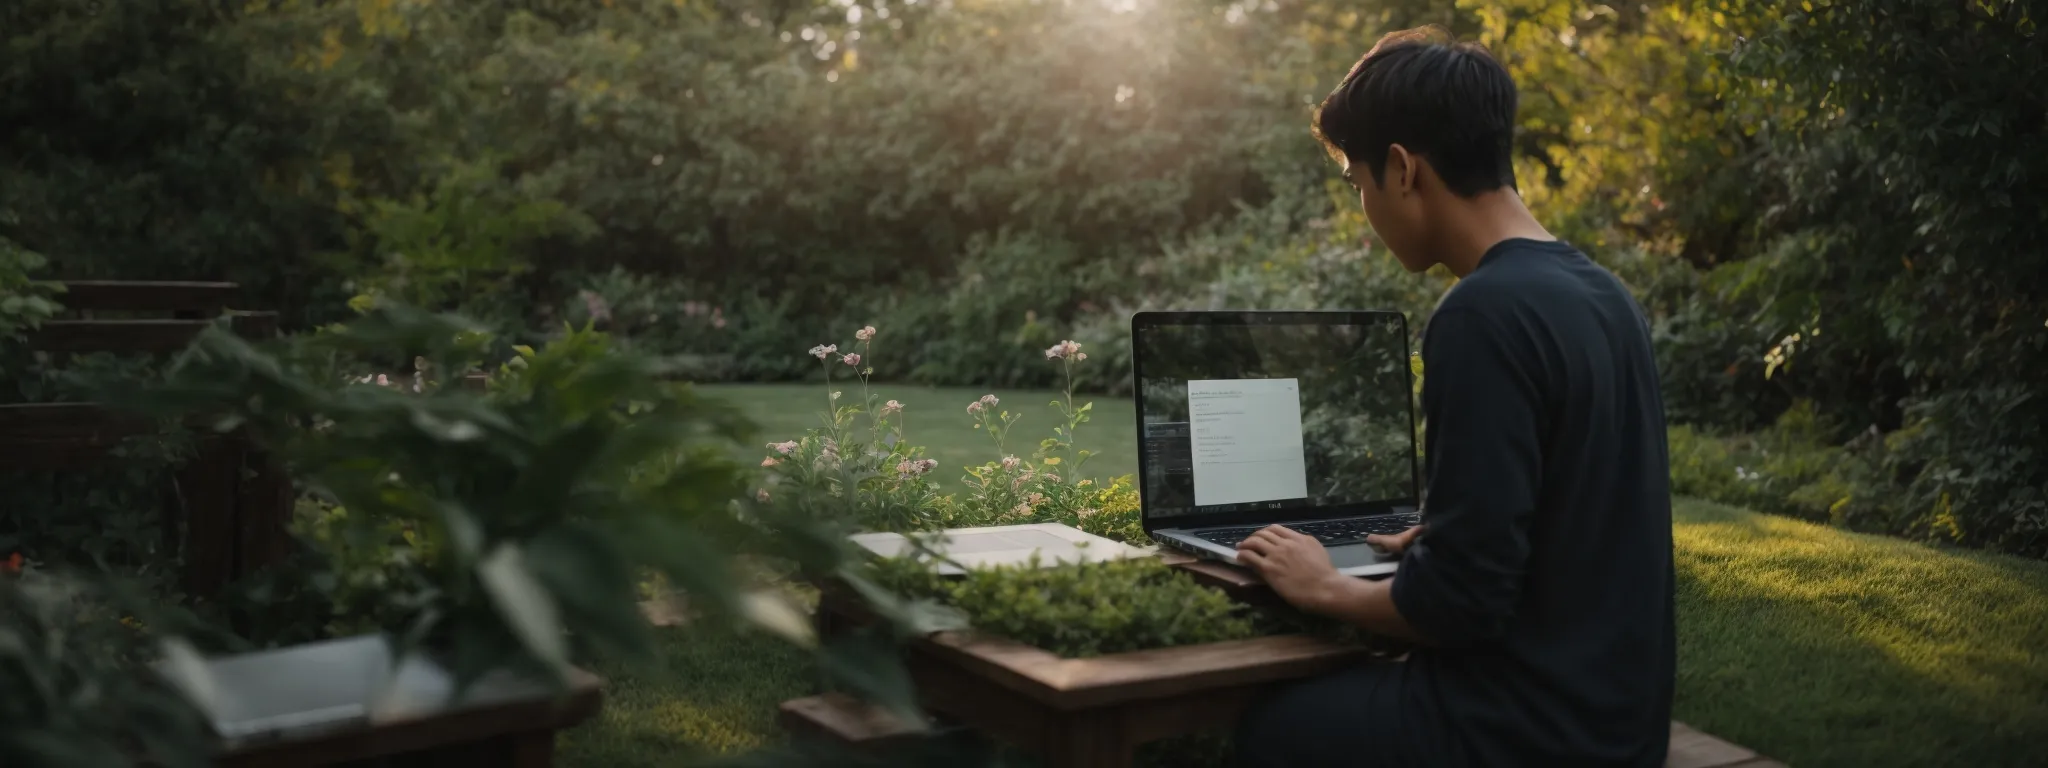 a person thoughtfully typing on a laptop with a serene garden in the background, symbolizing focused content creation.